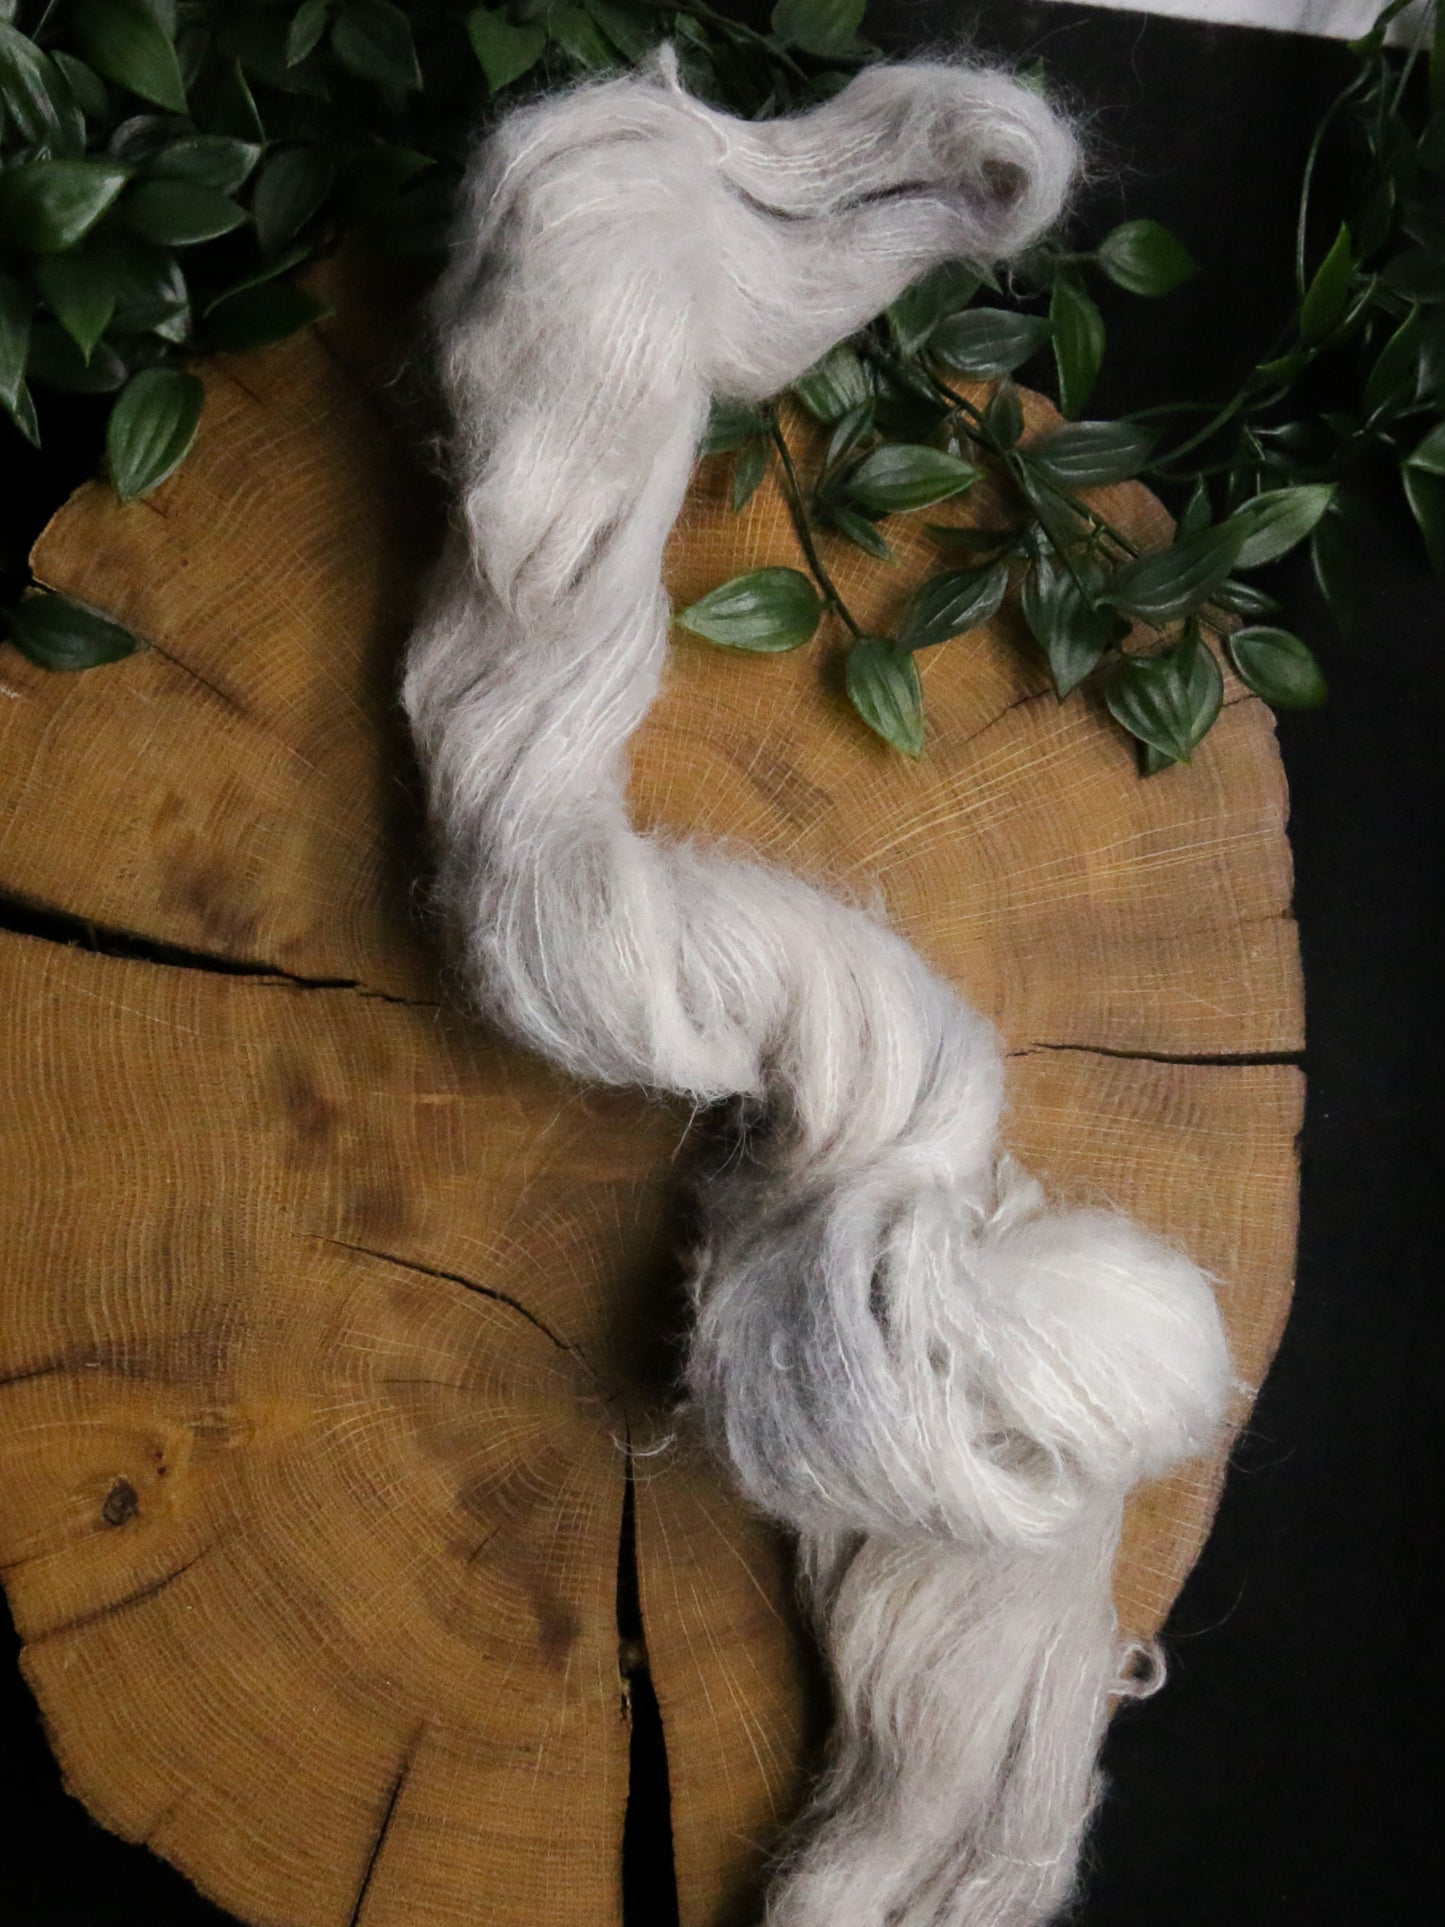 Pussywillow *lite* - Suri Alpaca Lace - Lace Weight